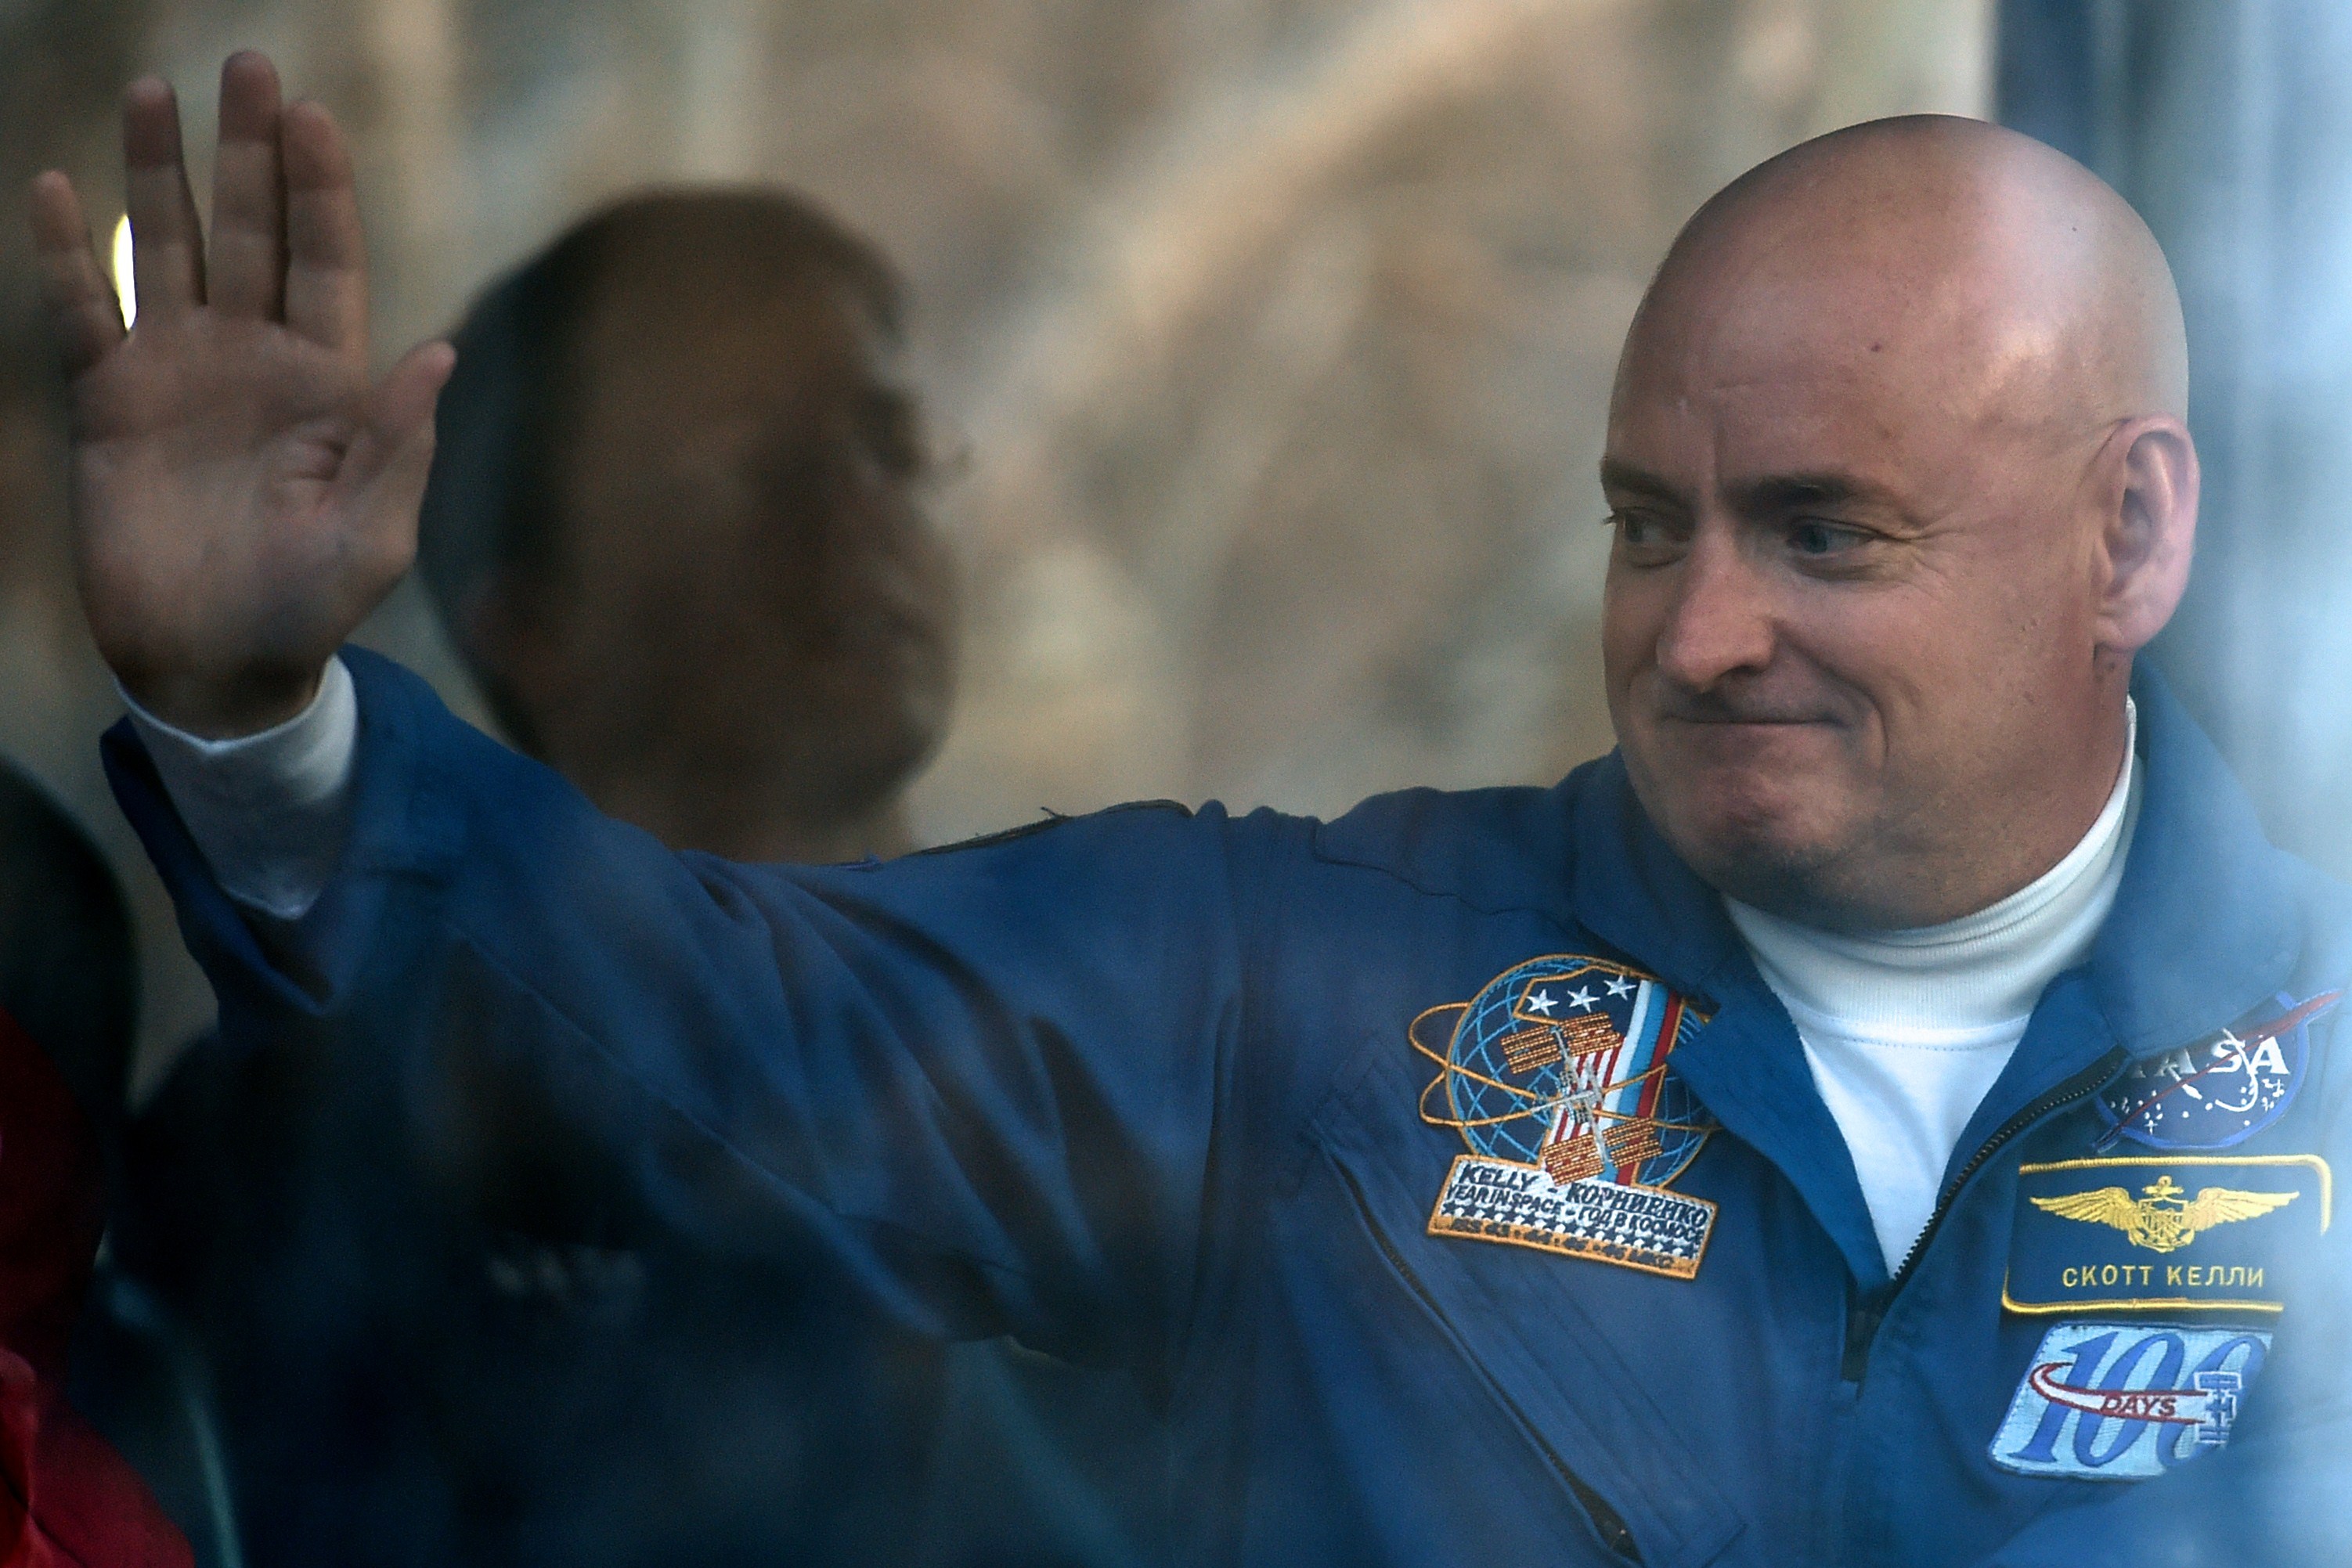 Scott Kelly waves from a bus during a sending-off ceremony in the Russian-leased Baikonur cosmodrome late on March 27, 2015. (Kirill Kudrayavtsev—AFP/Getty Images)